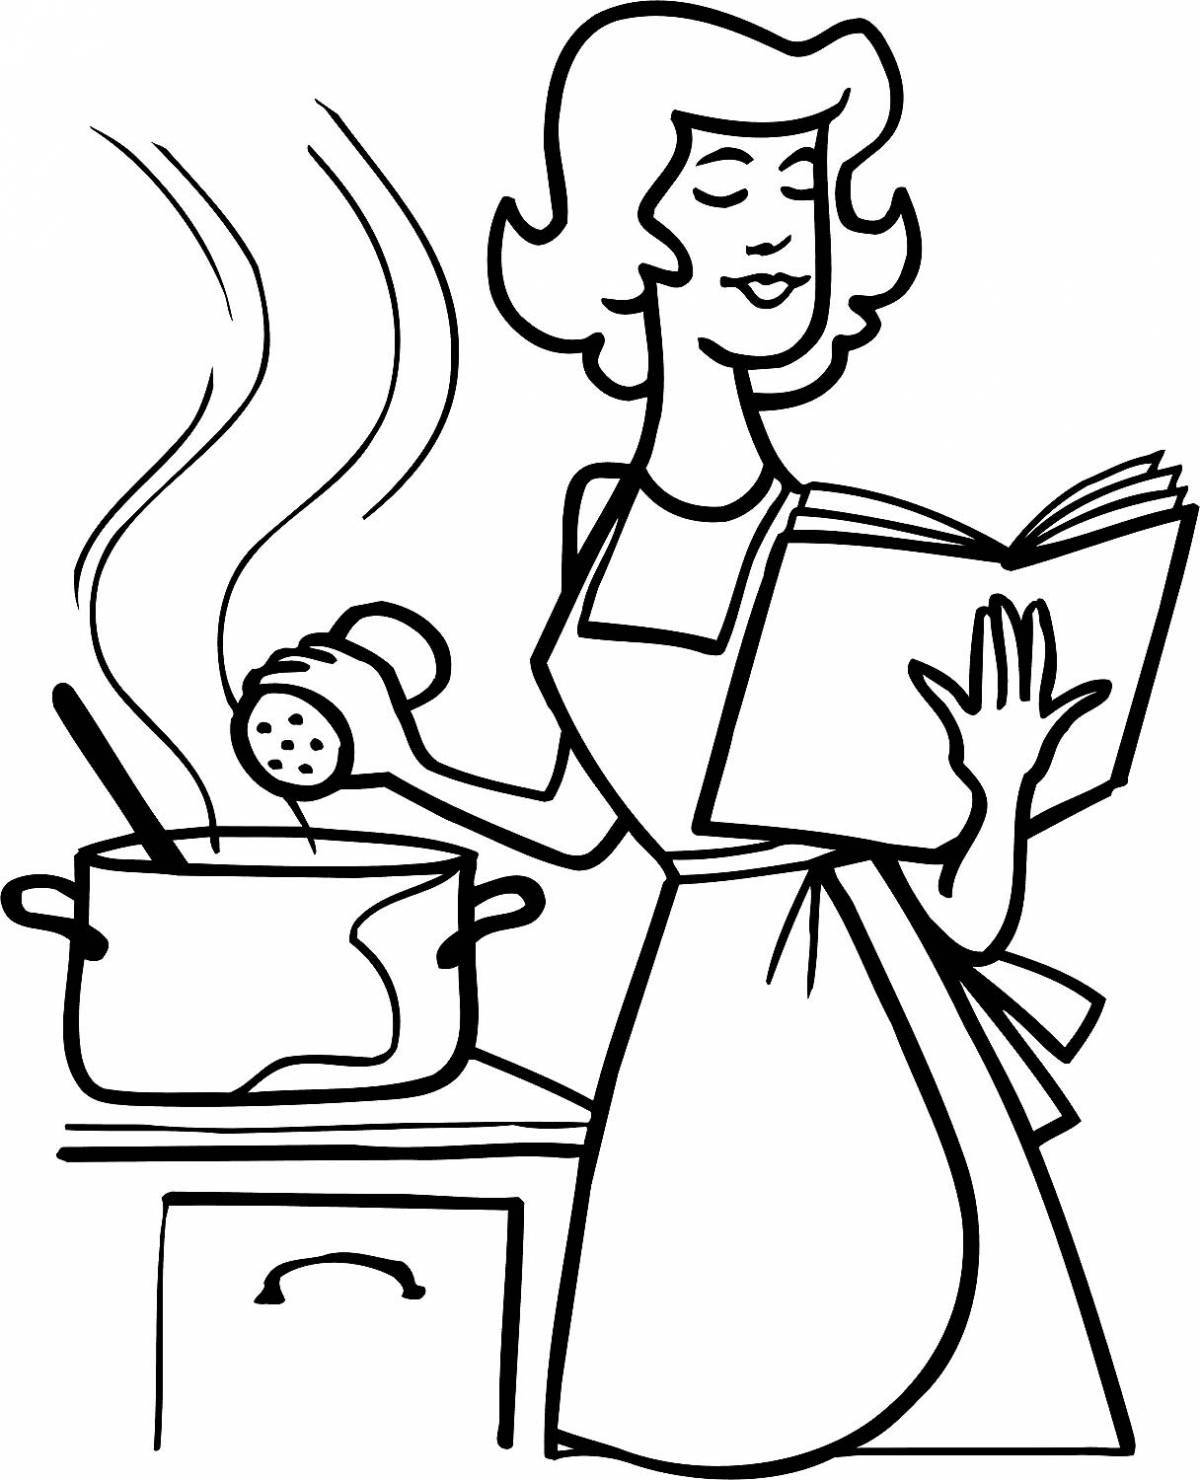 Coloring page wonderful mother